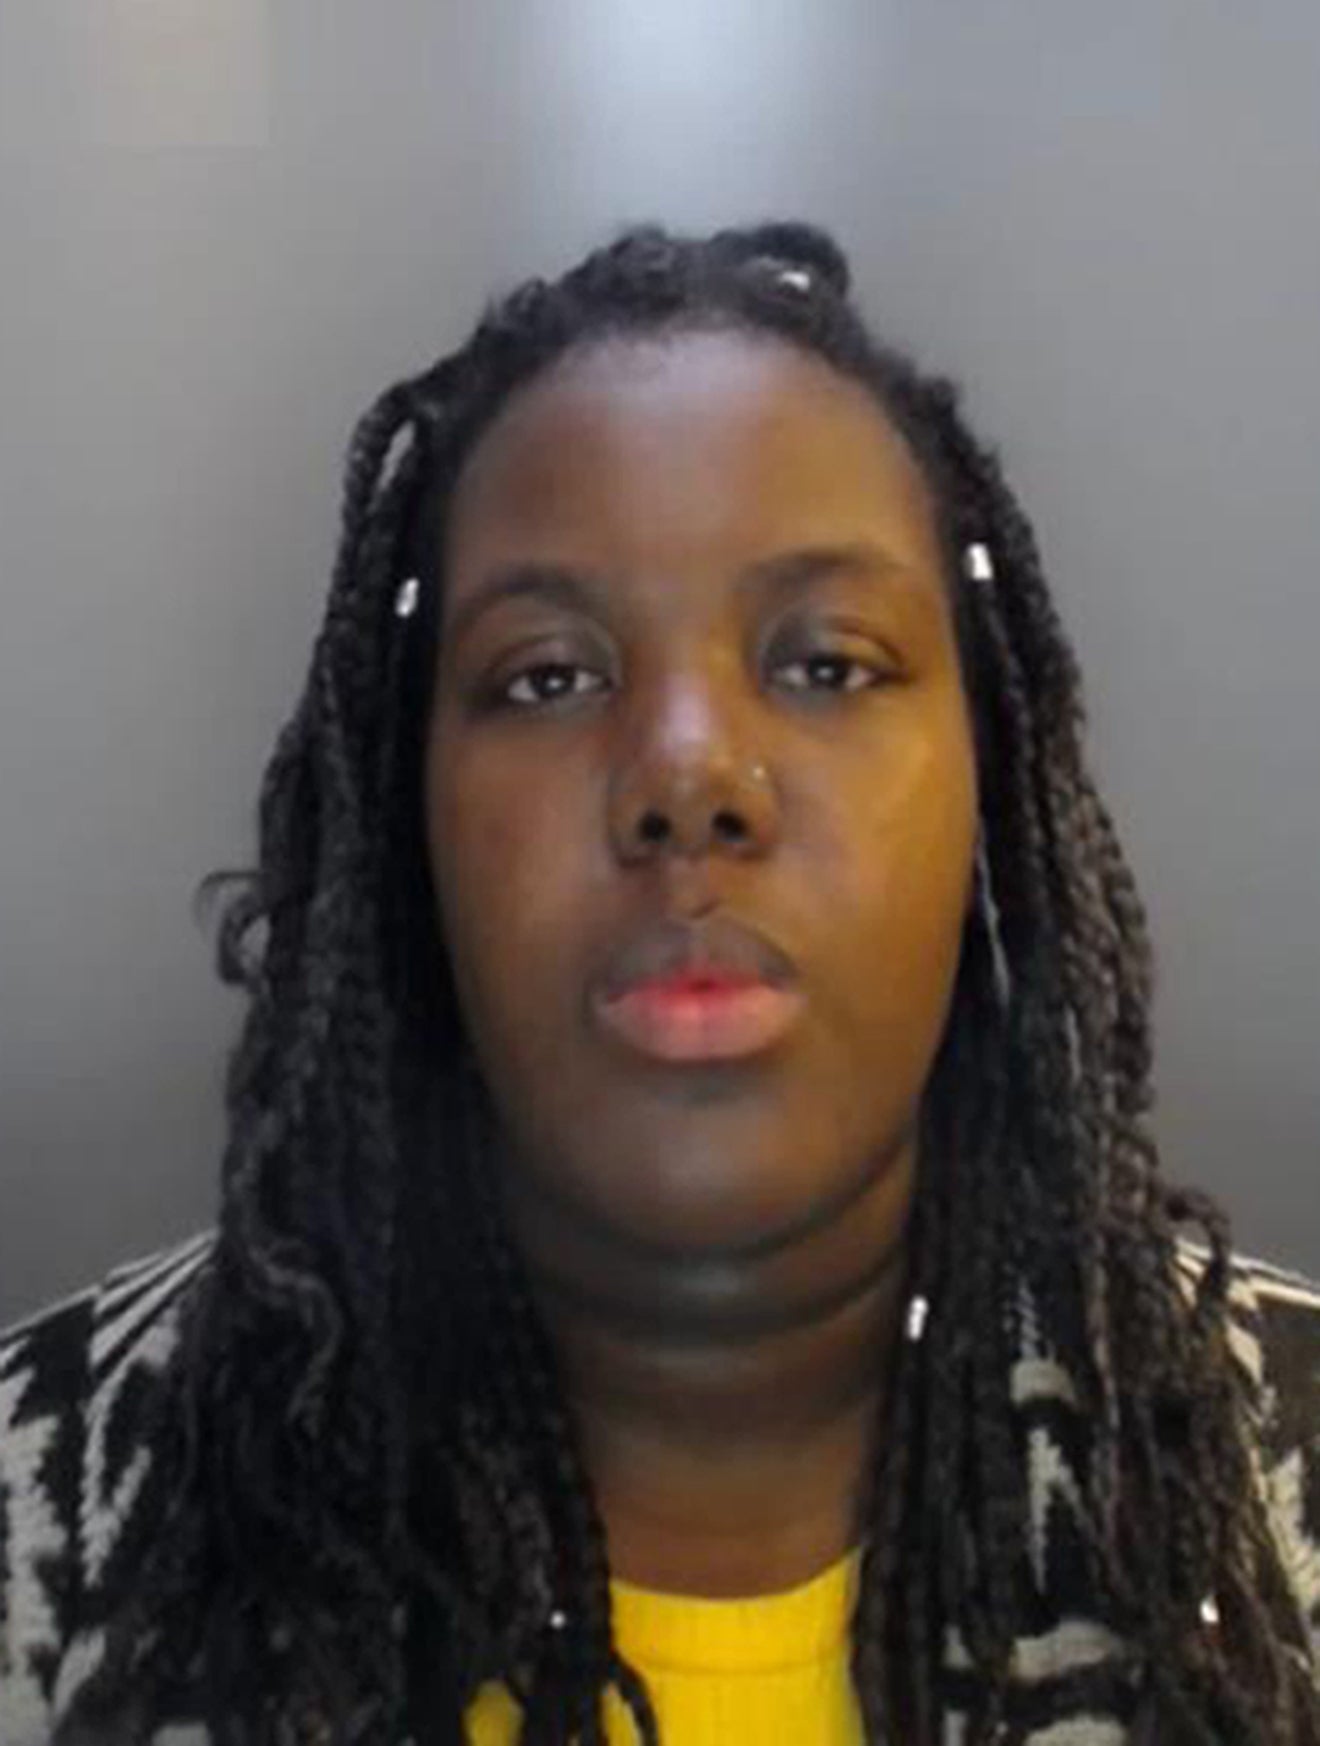 Christina Robinson, 30, did not seek medical help as safeguarding concerns would have been obvious if a health worker saw her son